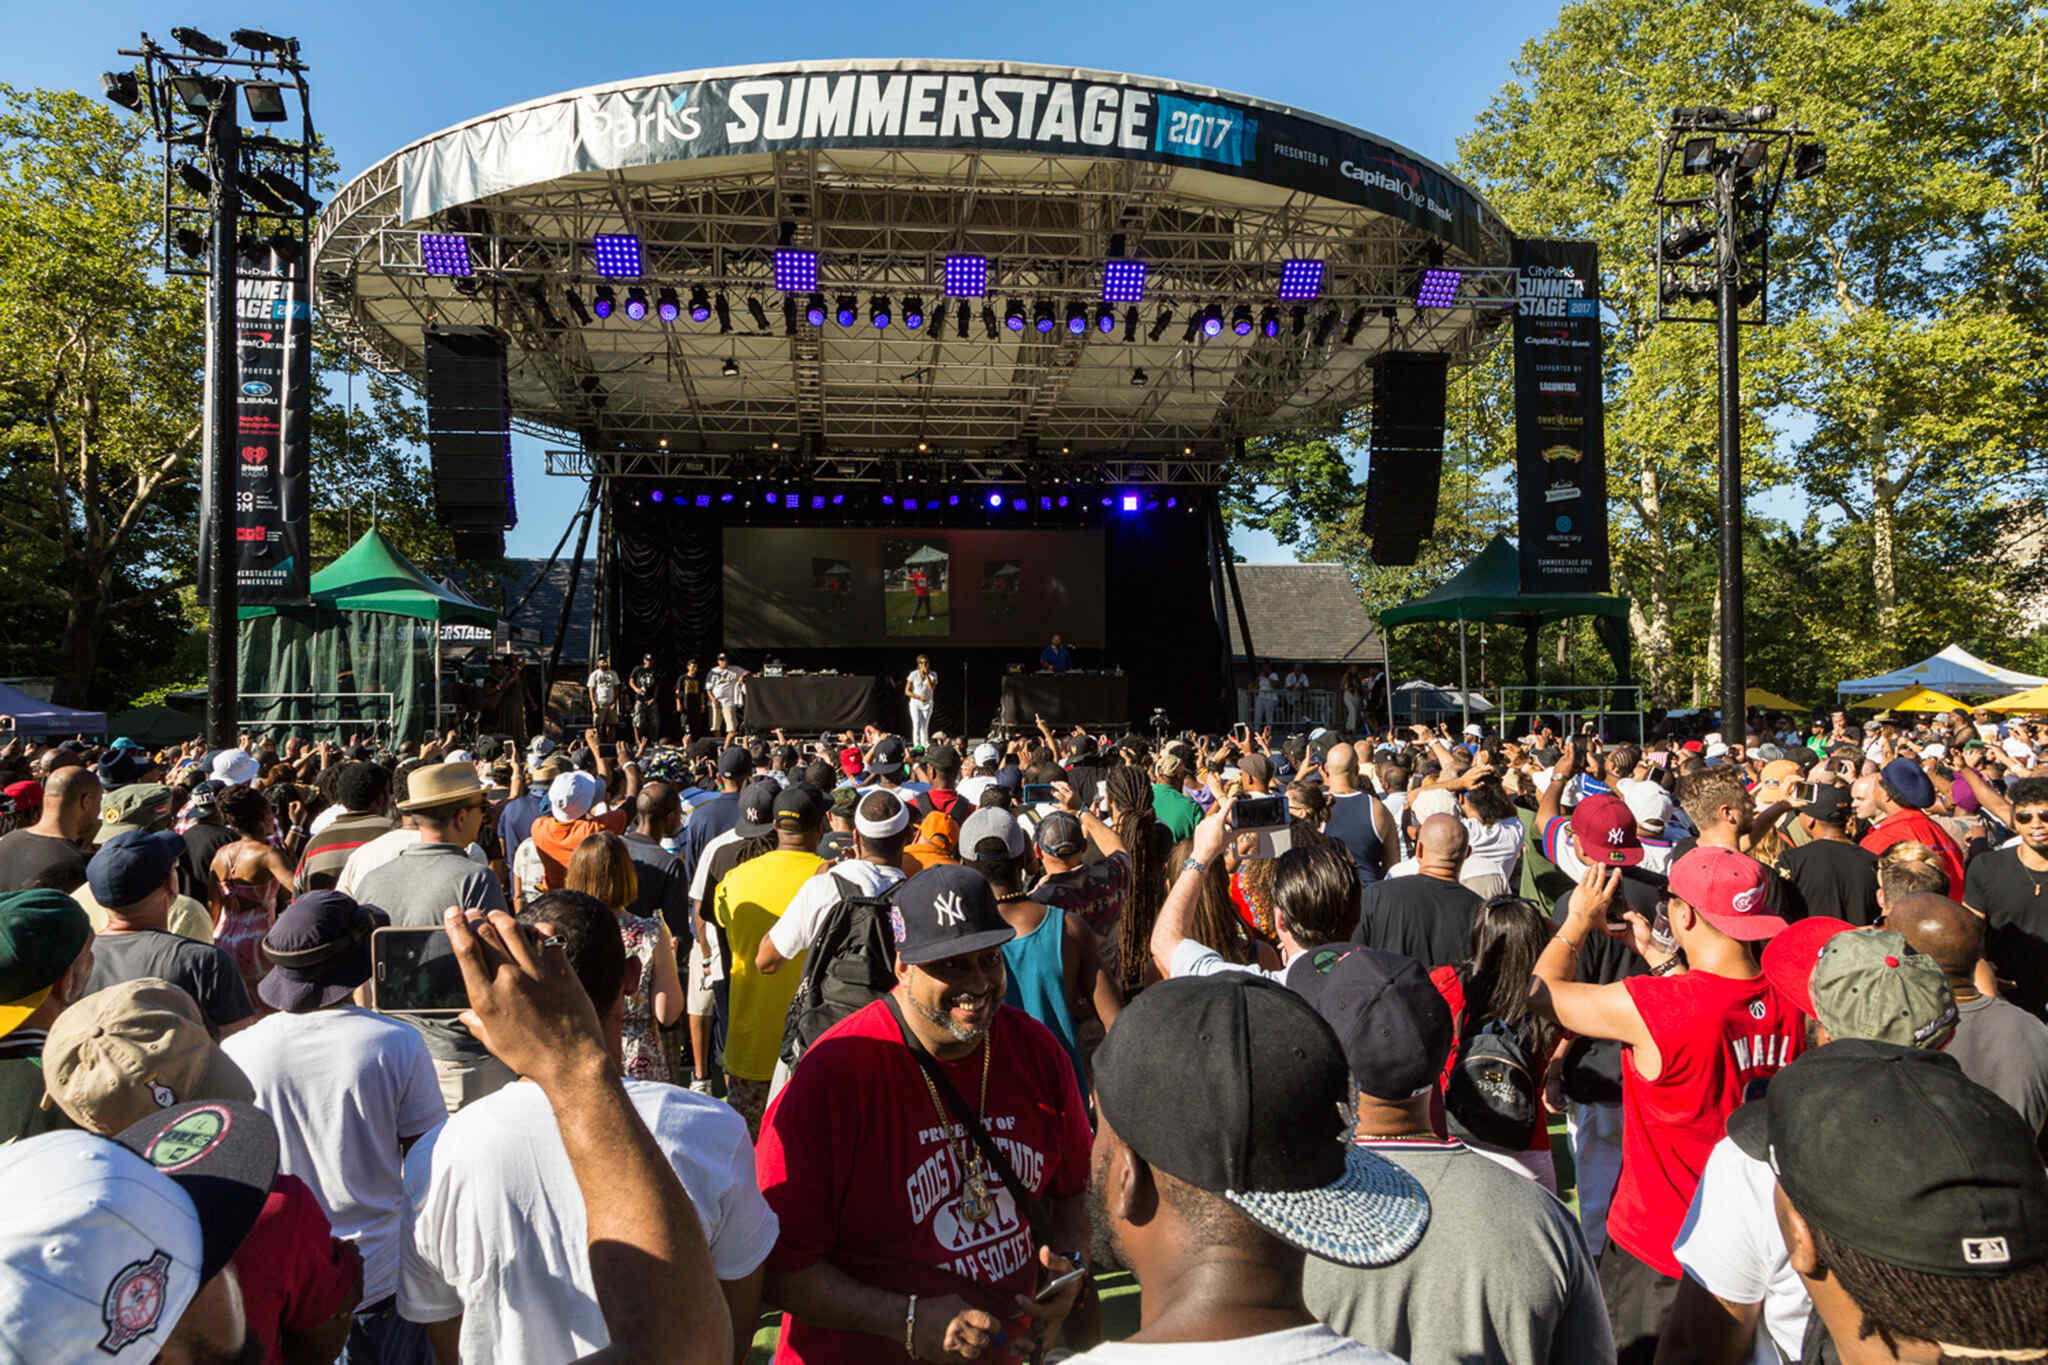 18-facts-about-central-park-summerstage